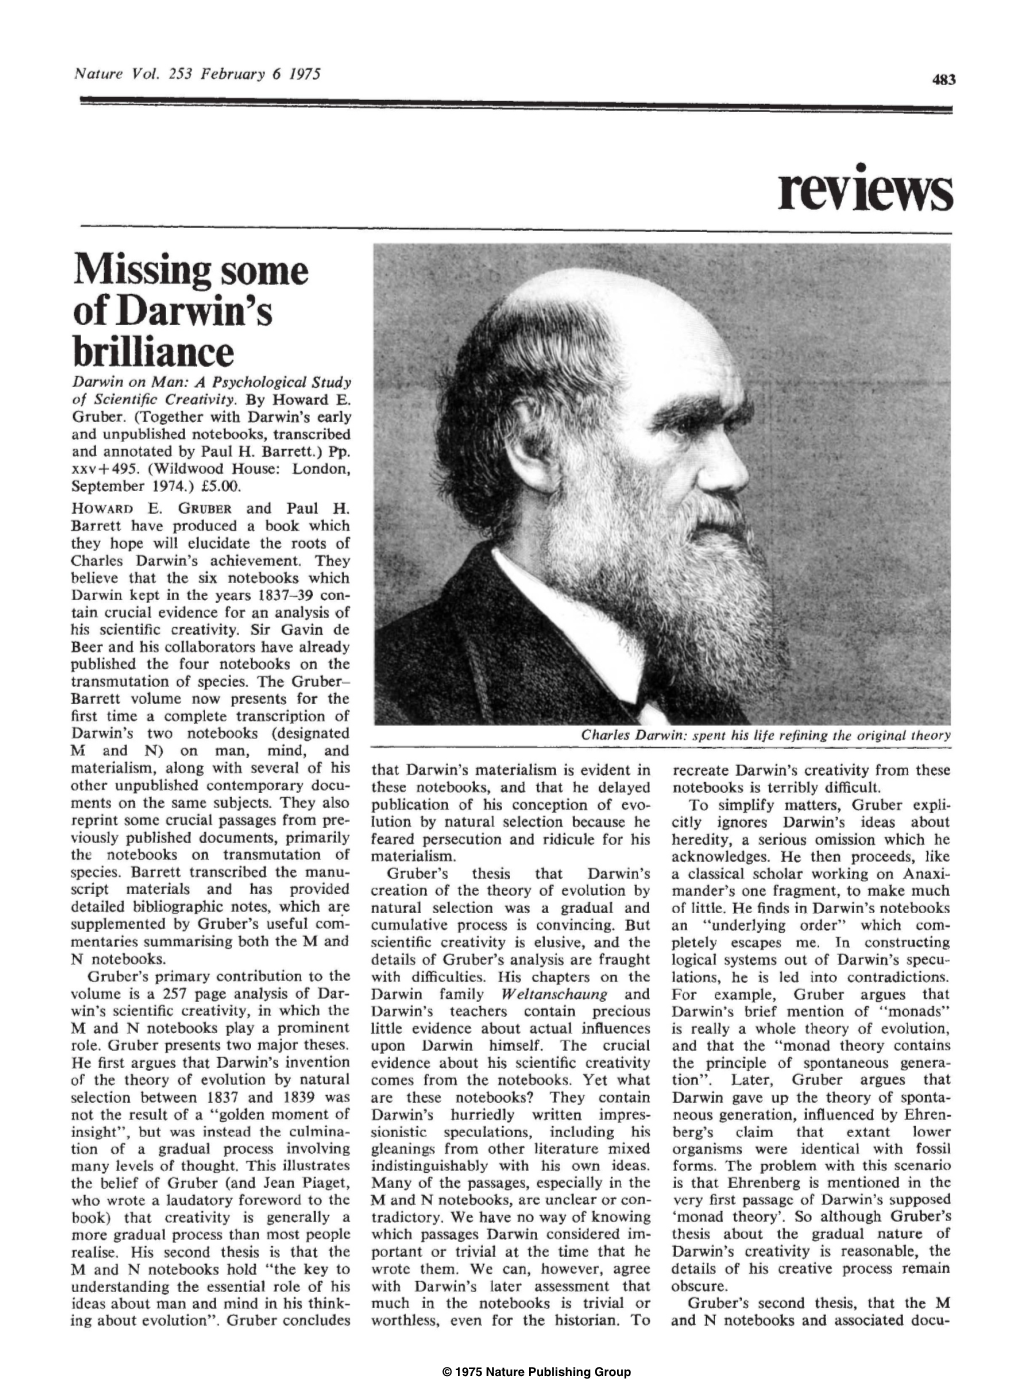 Reviews• Missing Some of Darwin's Brilliance Darwin on Man: a Psychological Study of Scientific Creativity